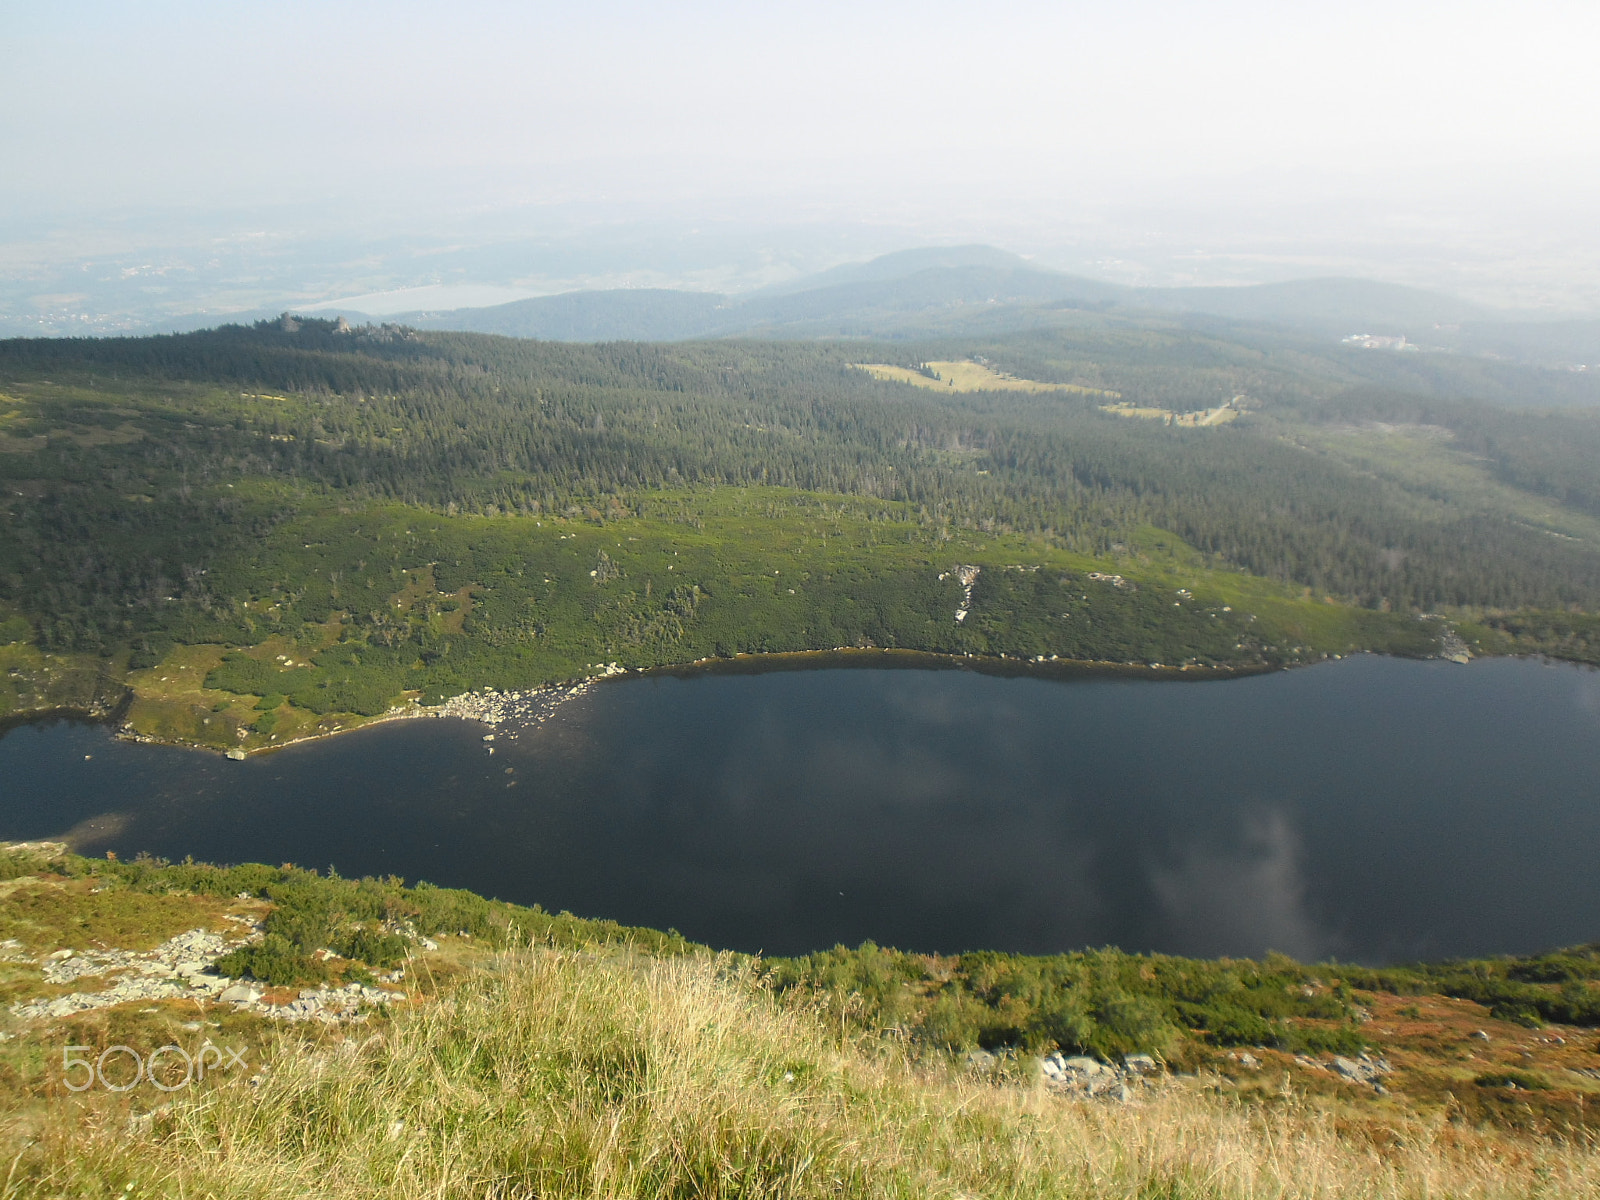 Samsung ES9/ ES8 sample photo. The big pond in the karkonosze national park, in the western poland photography